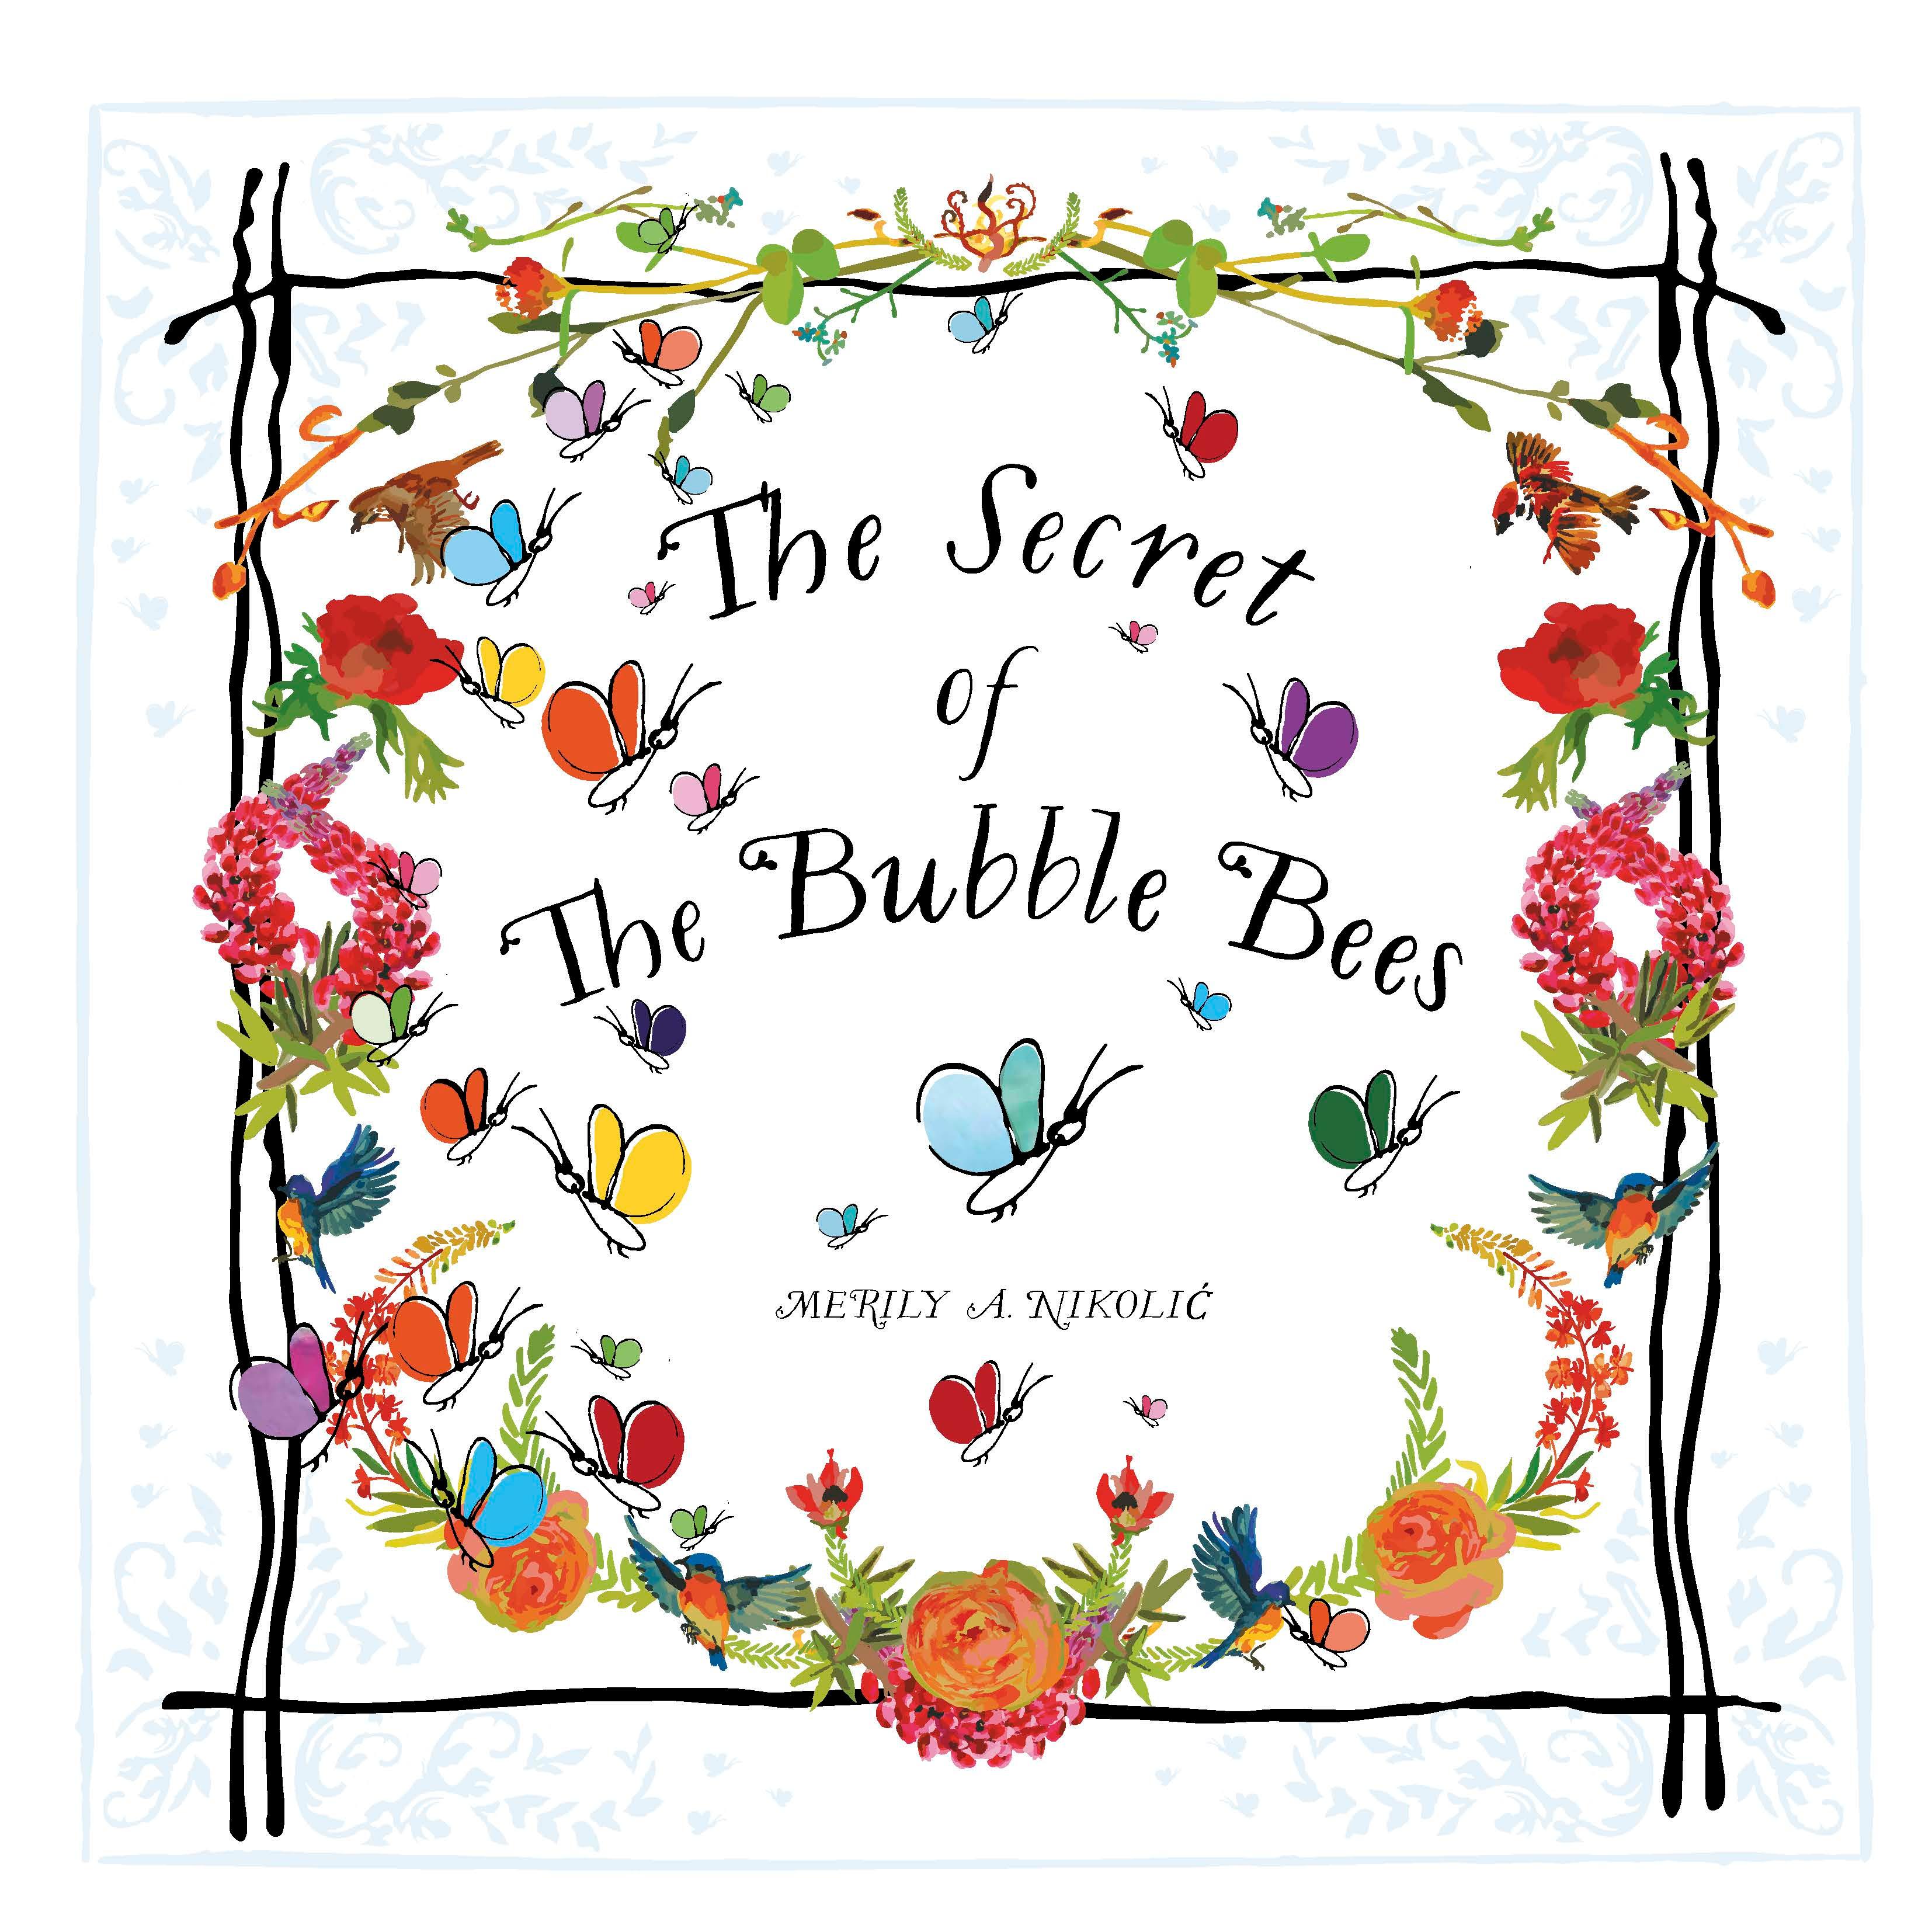 The Secret of The Bubble Bees